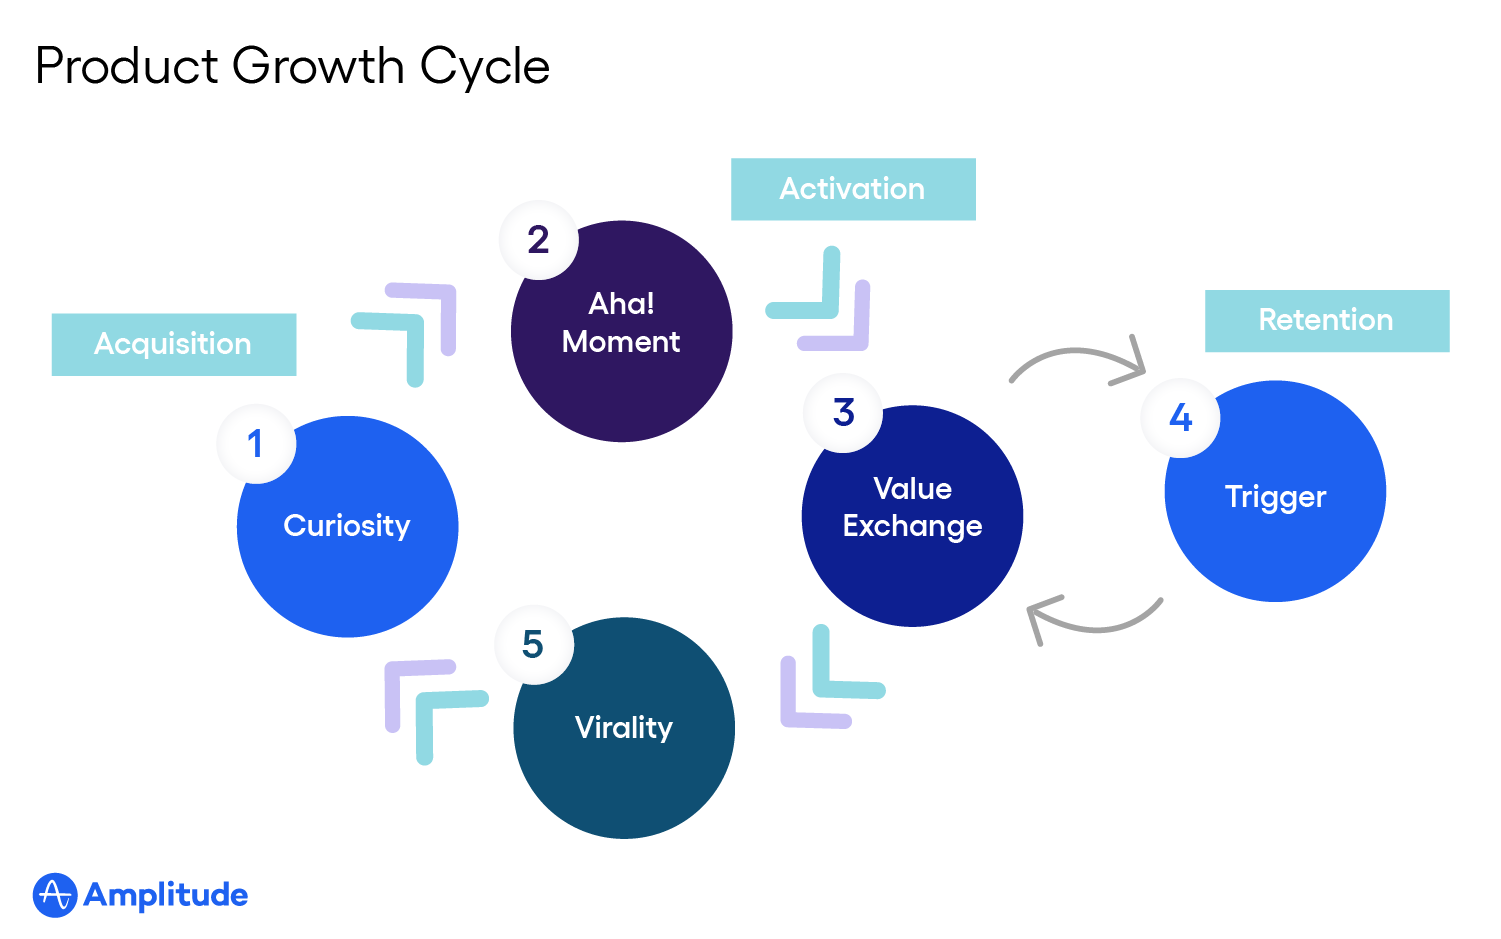 Product-led growth explained: Product Growth Cycle Diagram